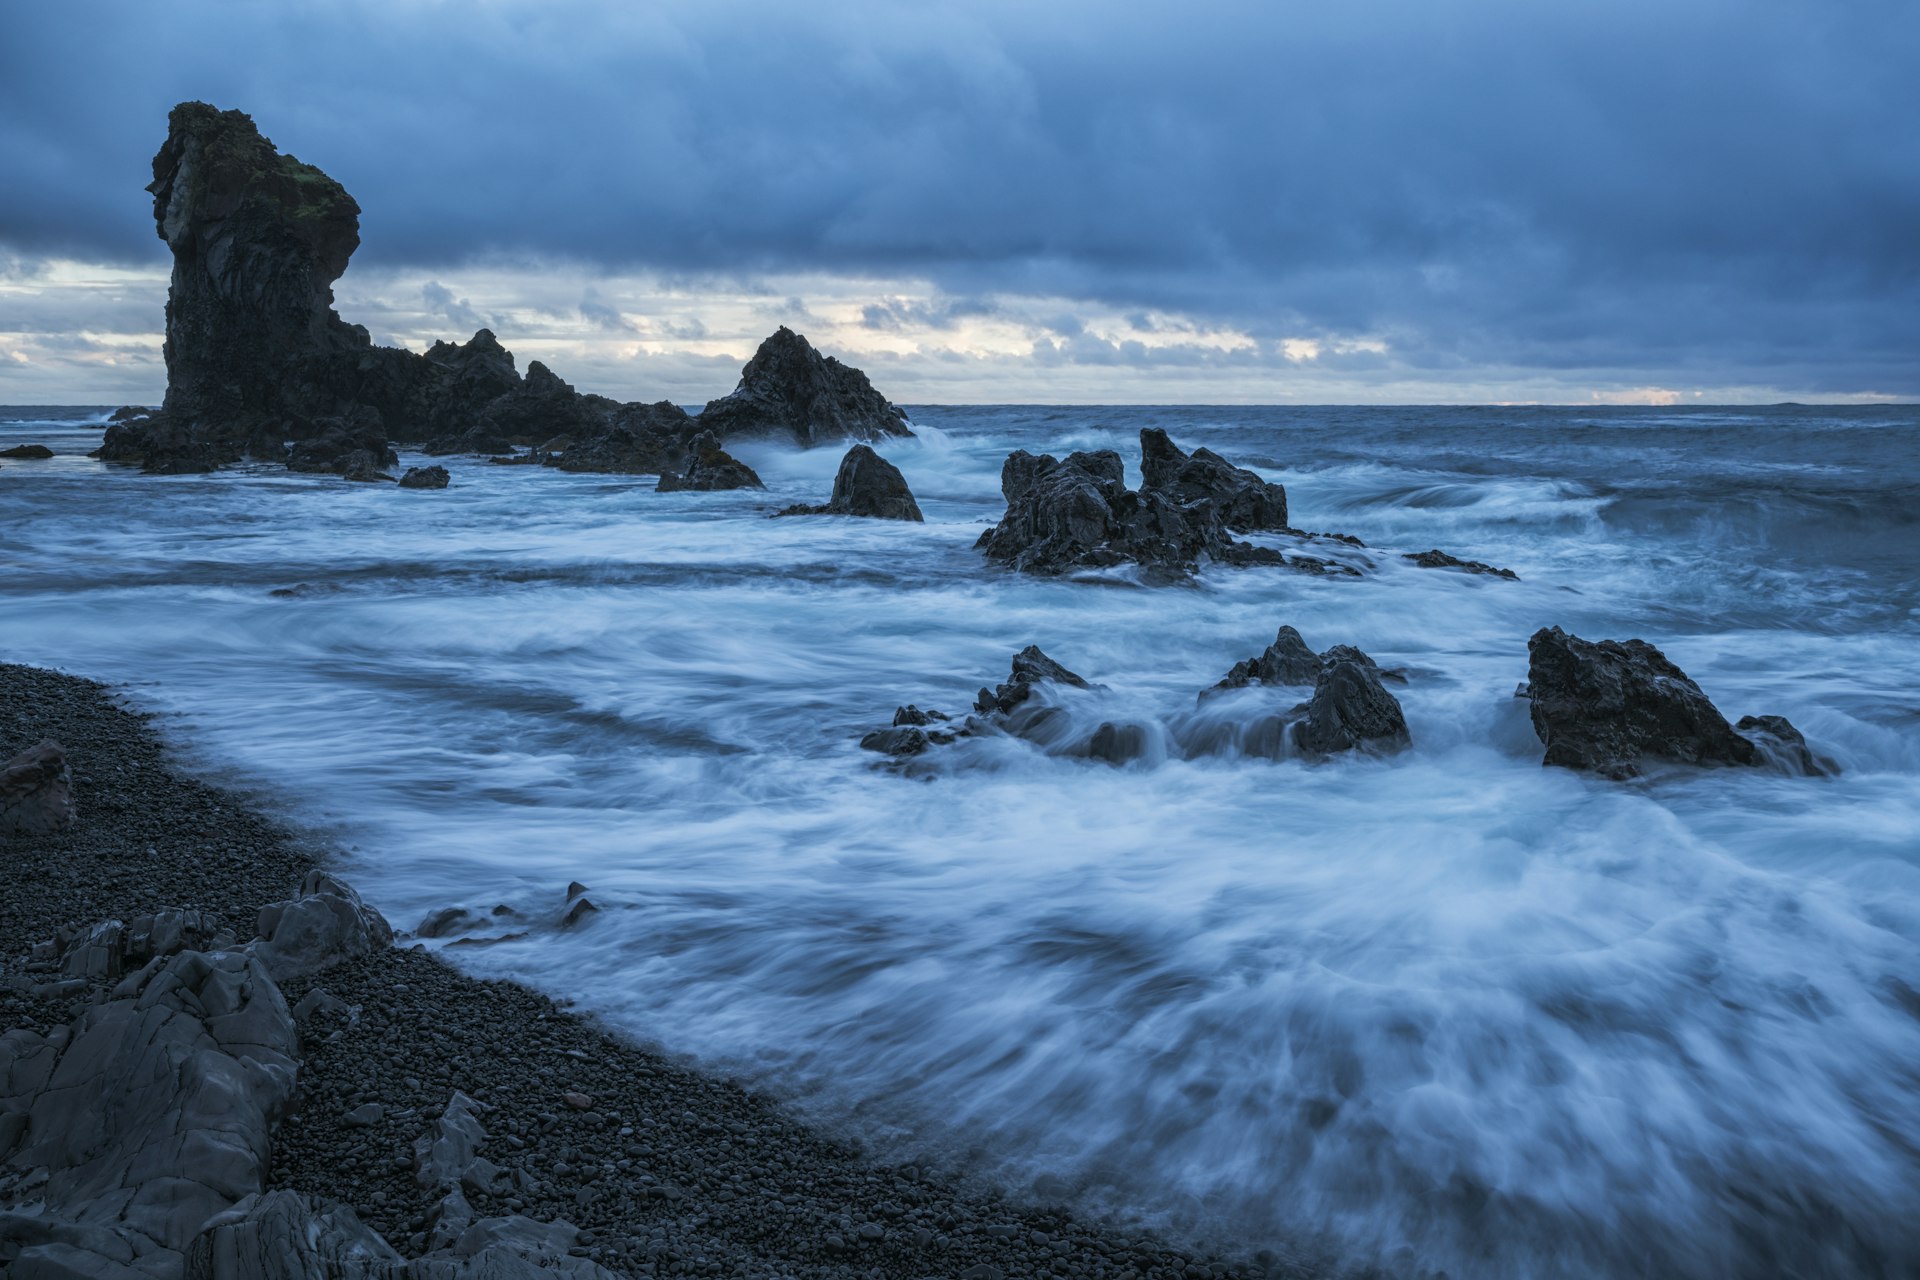 A black sand beach with pounding surf. Several huge rocky stacks stand tall out at sea.